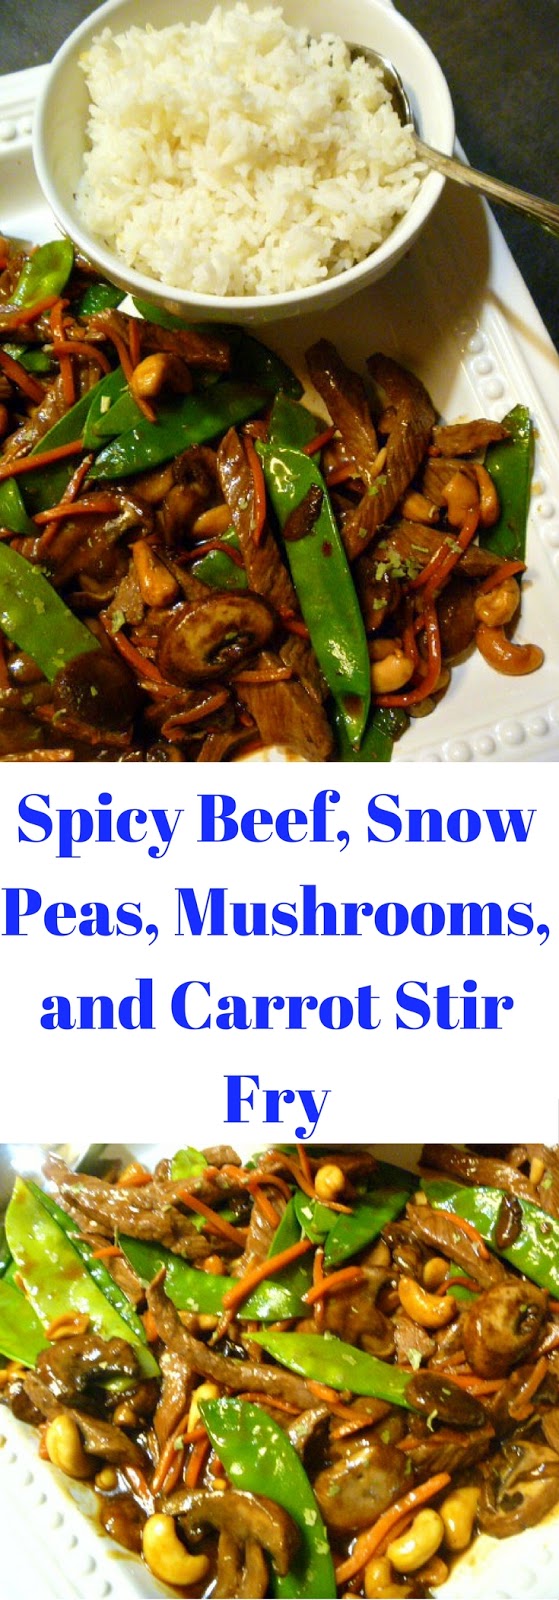 Slice of Southern: Spicy Beef, Snow Peas, Mushroom, and Carrot Stir Fry